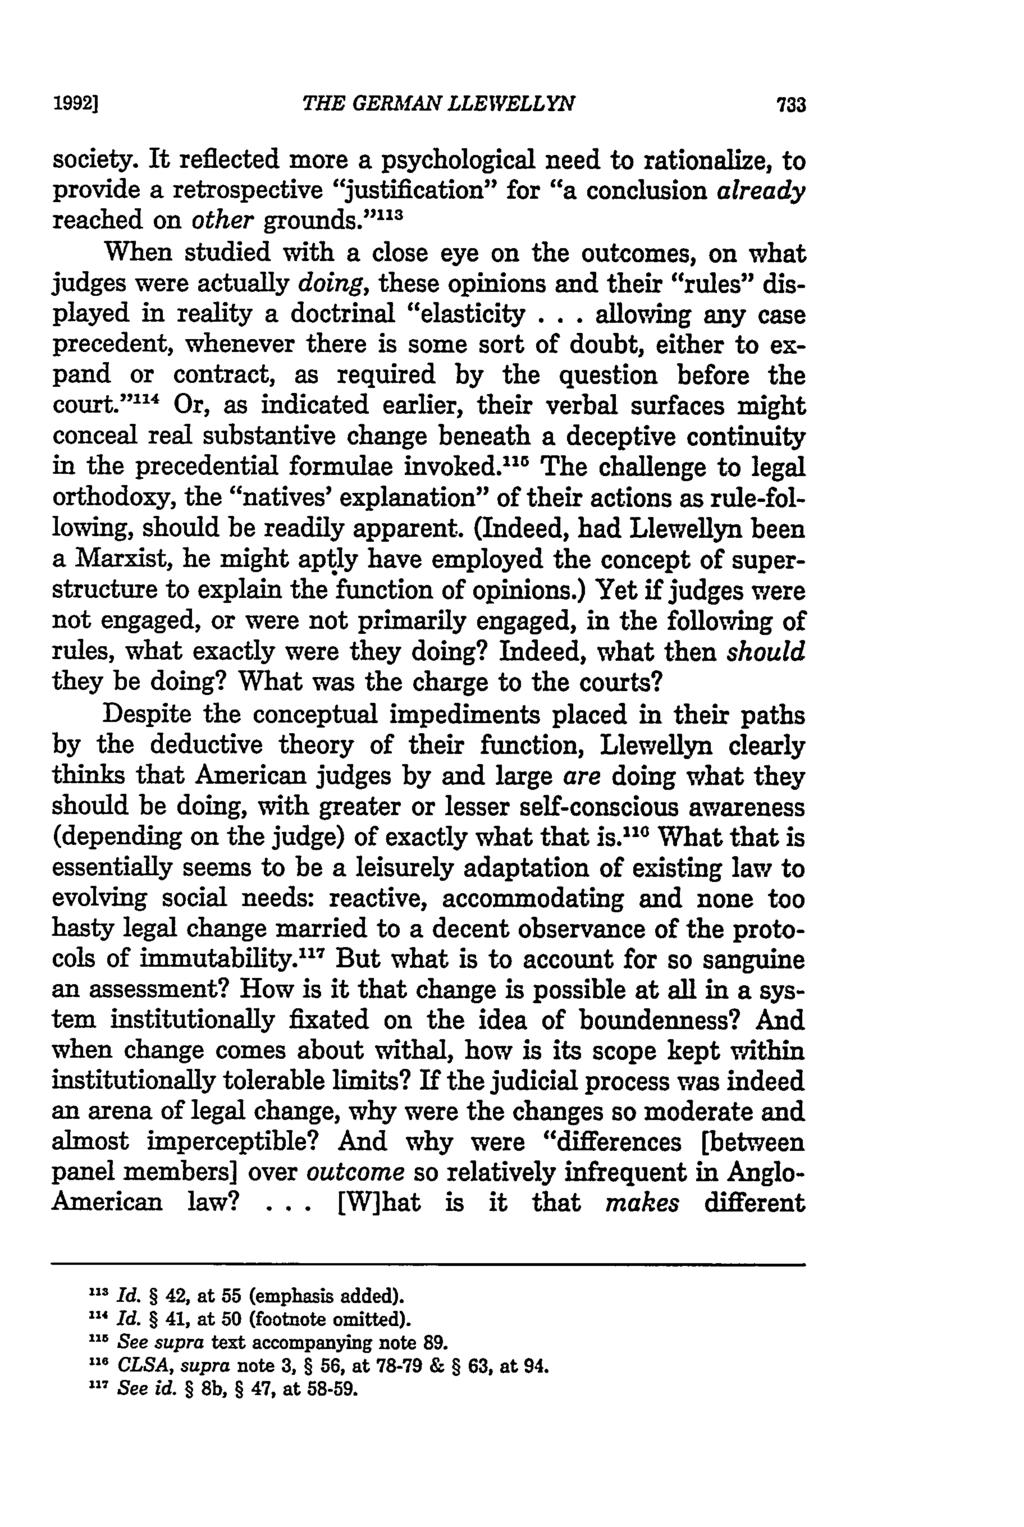 1992] THE GERMAN LLEWELLYN society. It reflected more a psychological need to rationalize, to provide a retrospective "justification" for "a conclusion already reached on other grounds.